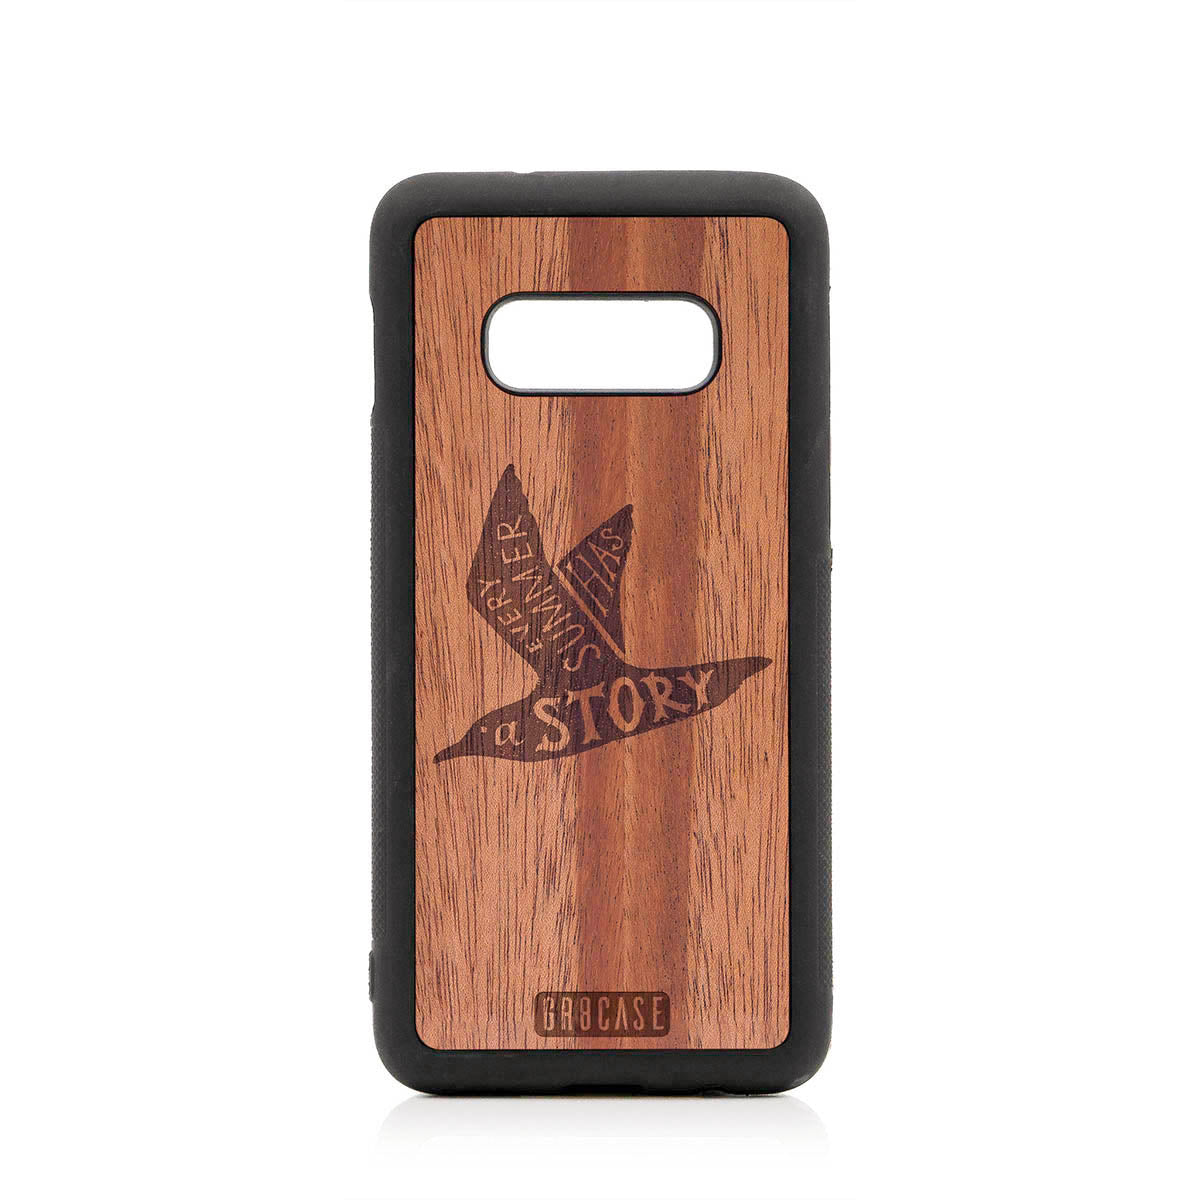 Every Summer Has A Story (Seagull) Design Wood Case For Samsung Galaxy S10E